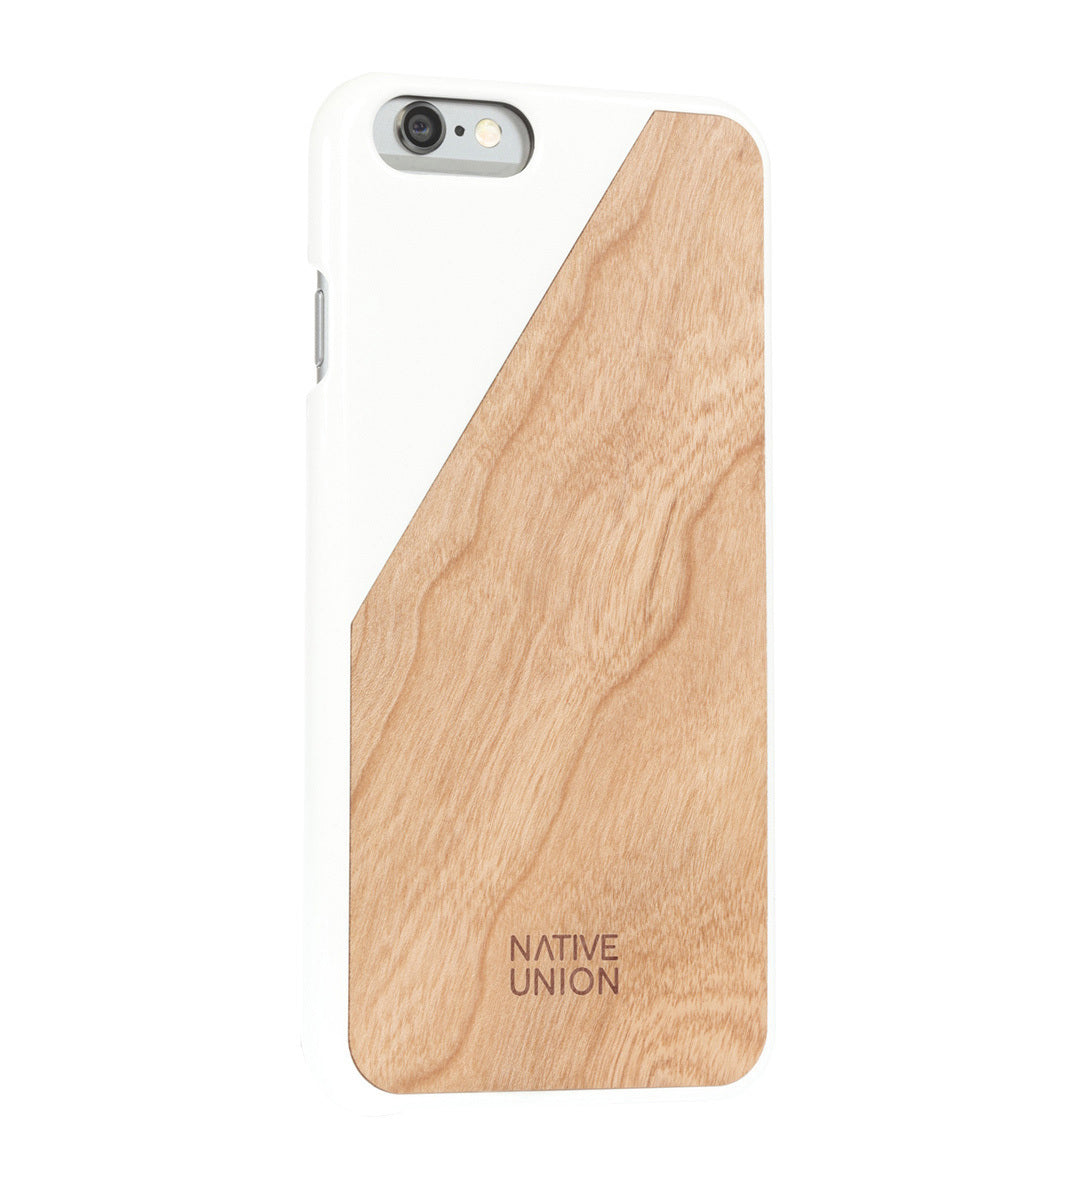 Genuine Native Union Clic Wooden for iPhone 6/6s/7 - White New